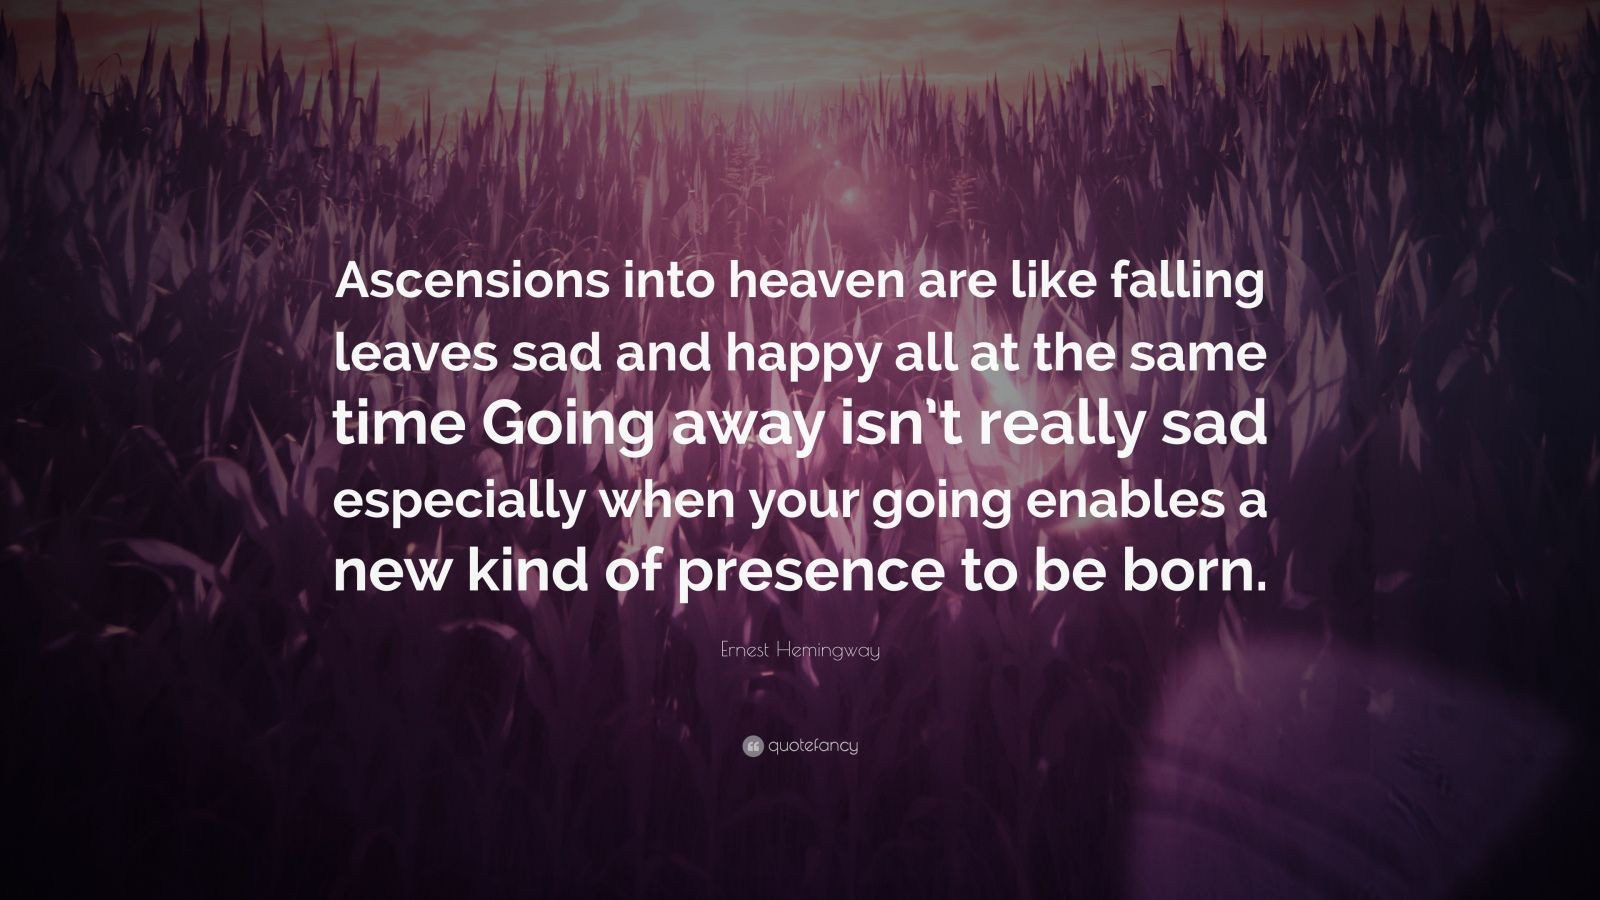 Happy And Sad At The Same Time Quotes
 Ernest Hemingway Quote “Ascensions into heaven are like